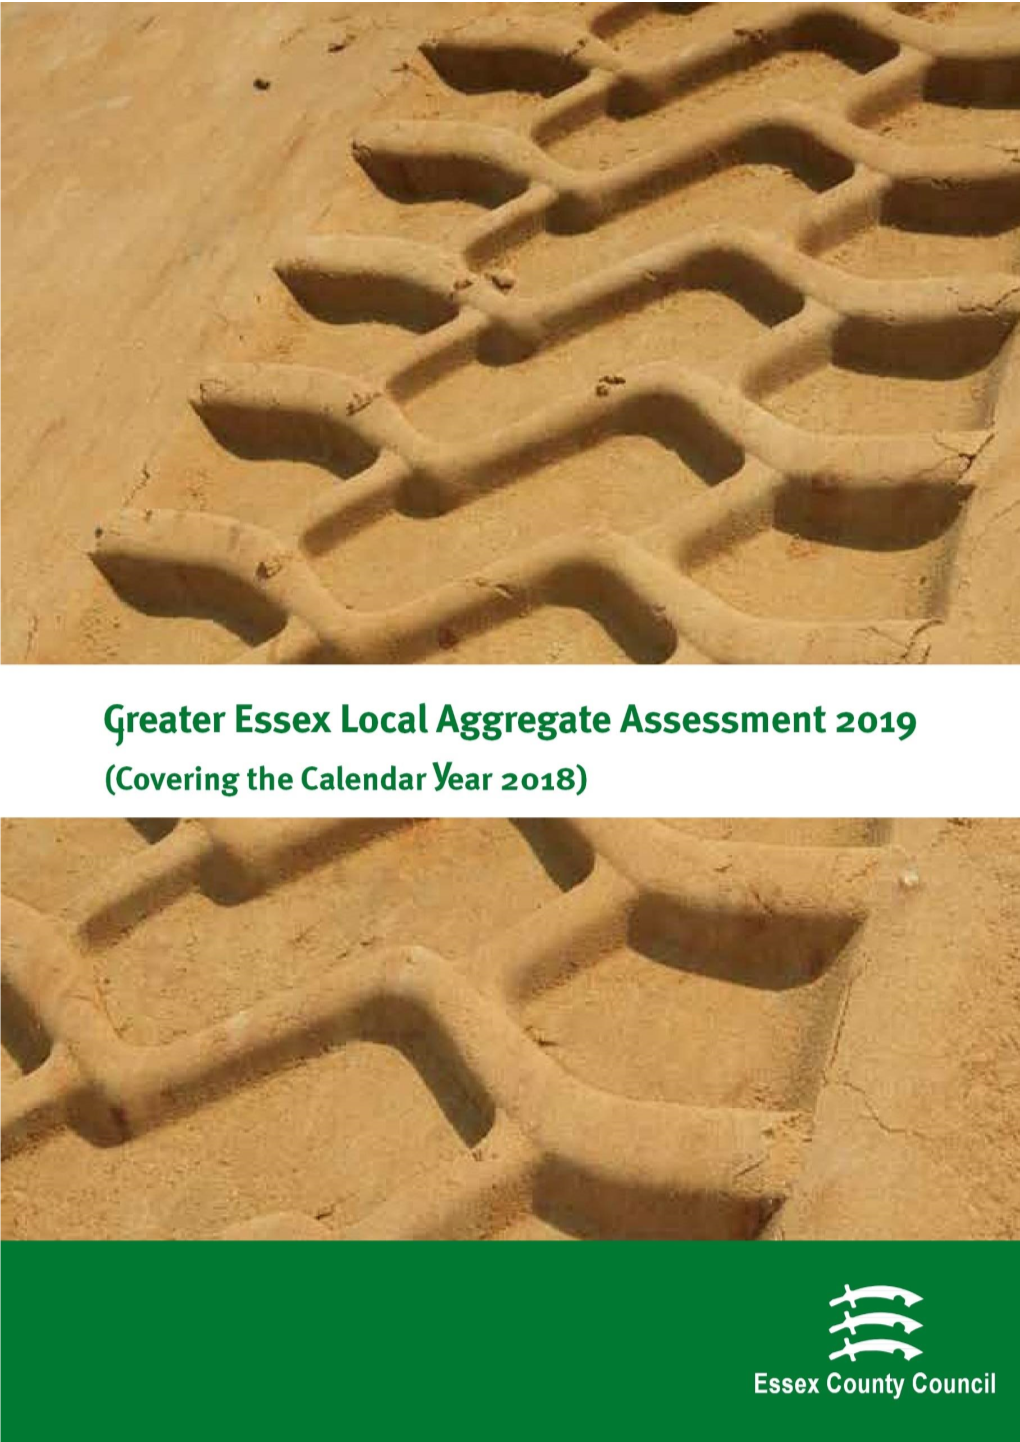 Greater Essex Local Aggregate Assessment 2019 (Covering the Calendar Year of 2018)